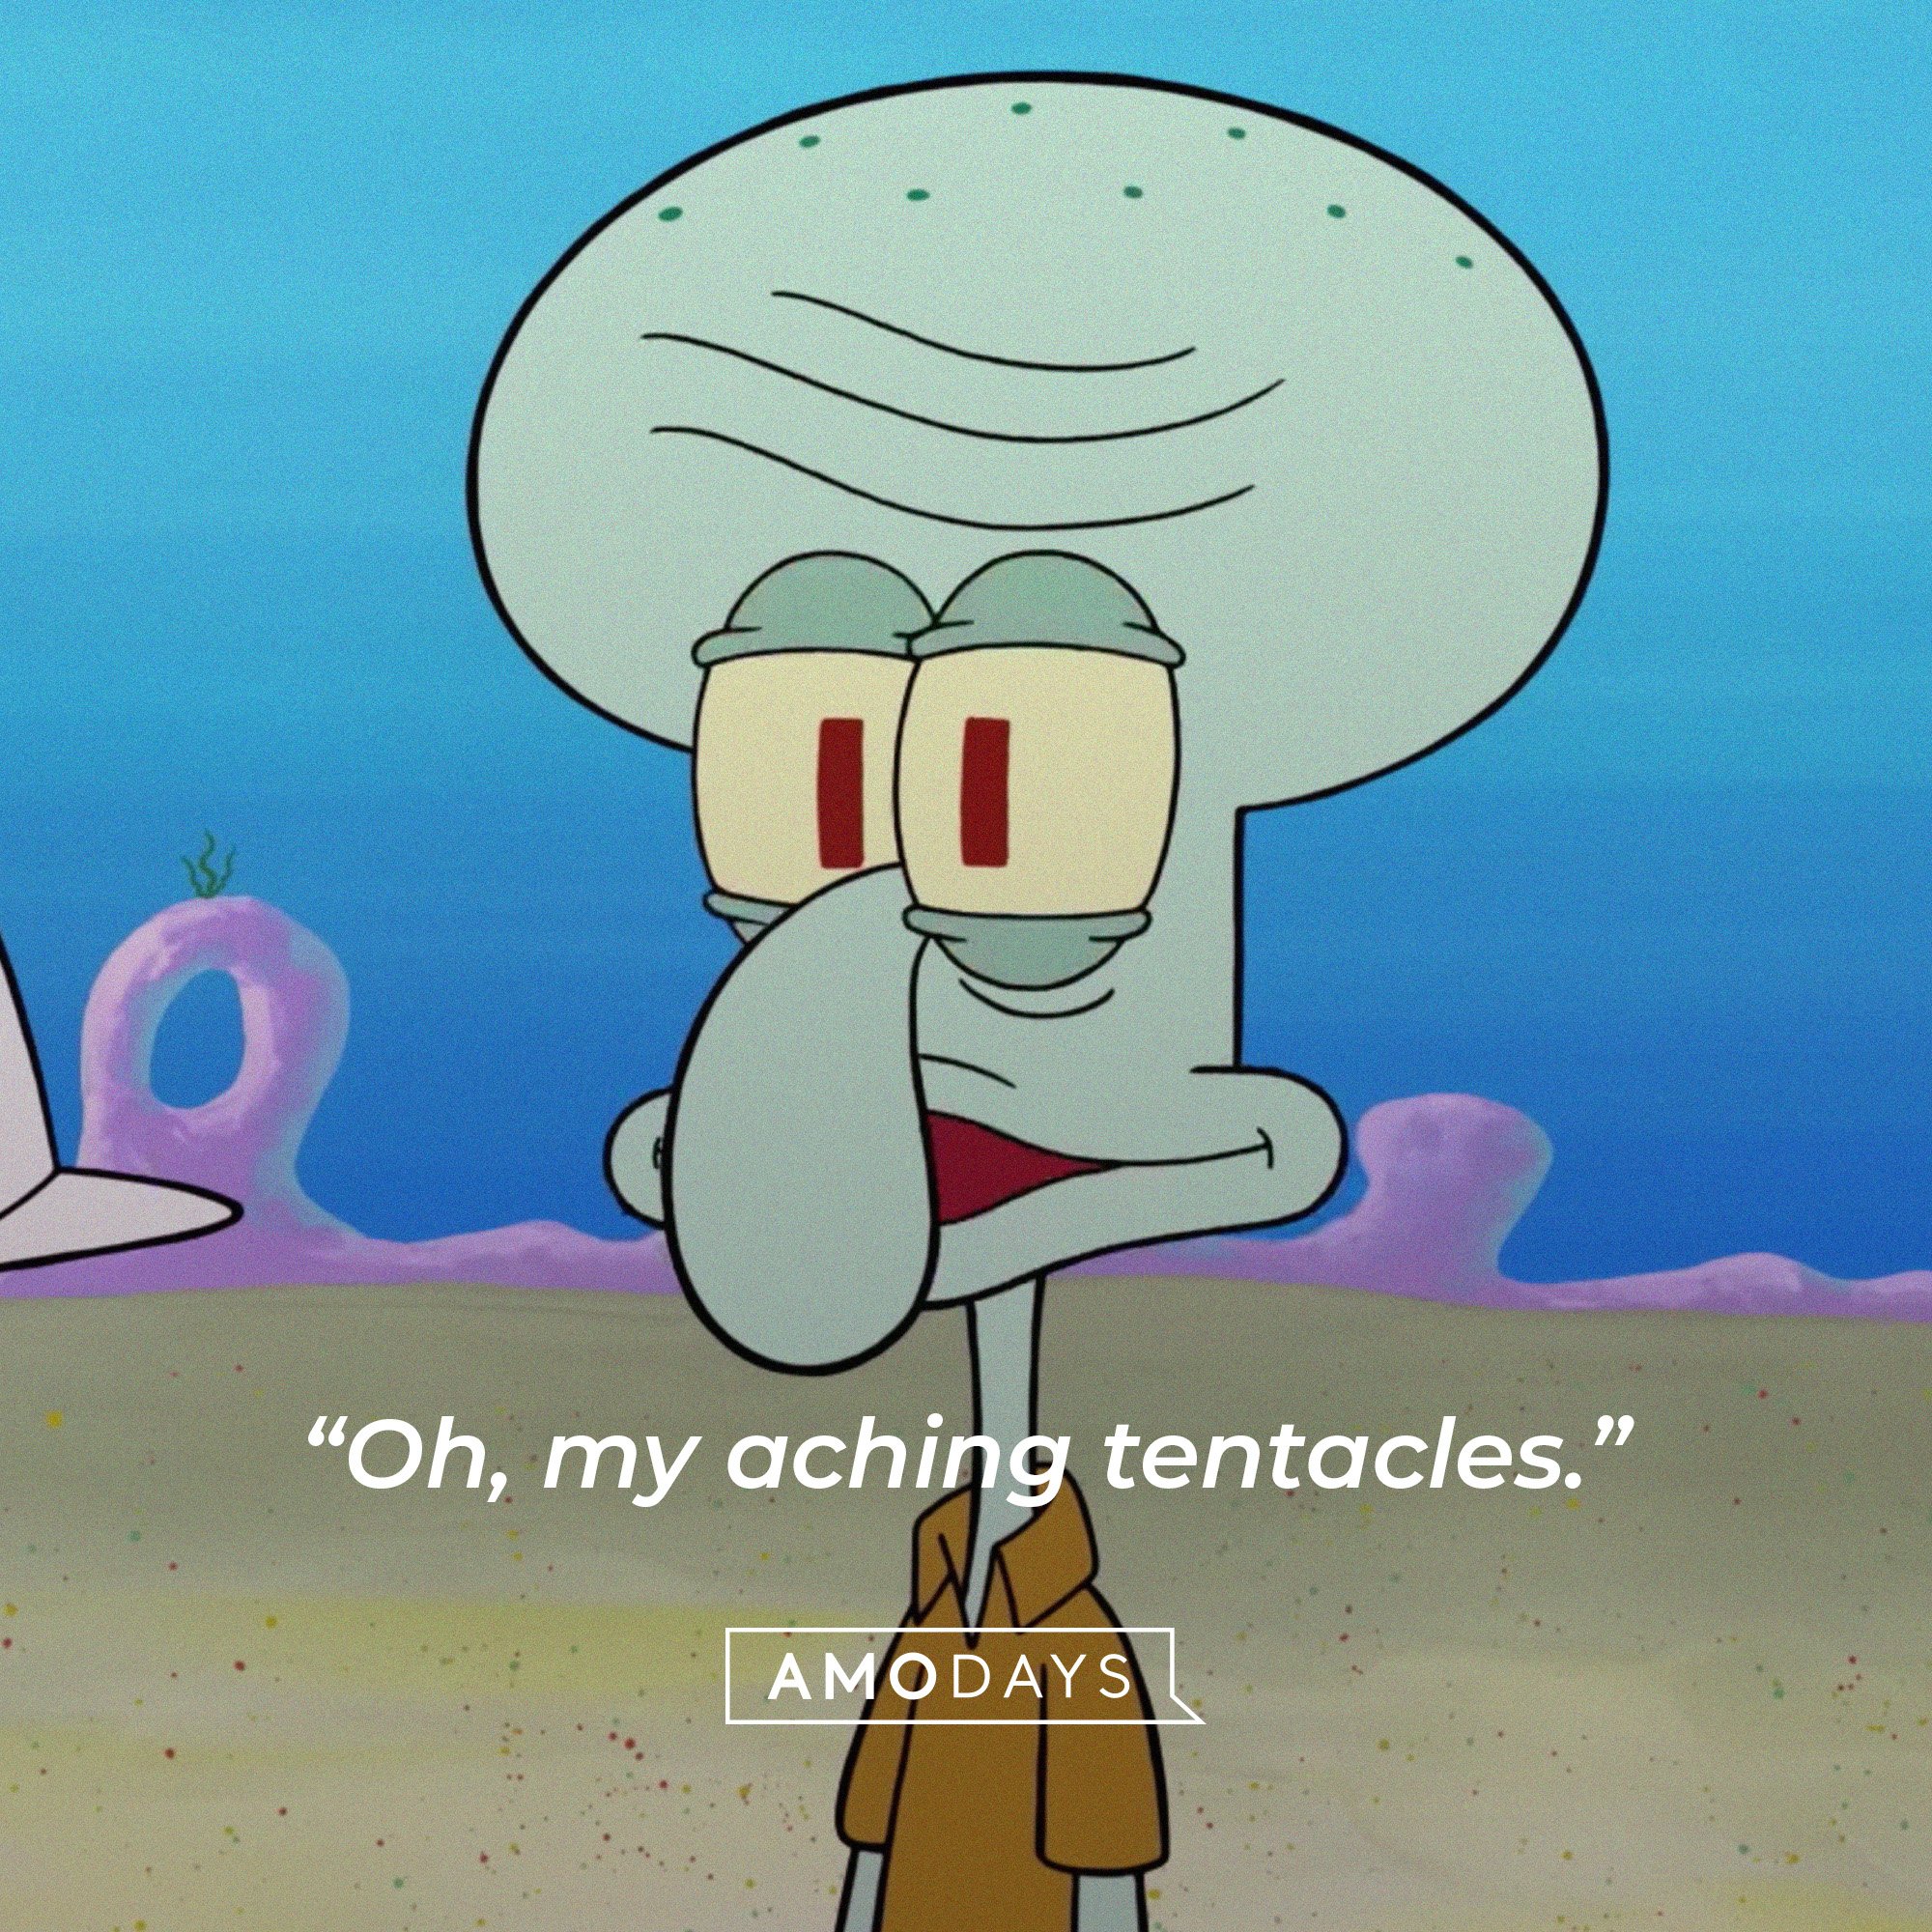 Squidward Tentacles’ quote: "Oh, my aching tentacles.” | Source: AmoDays